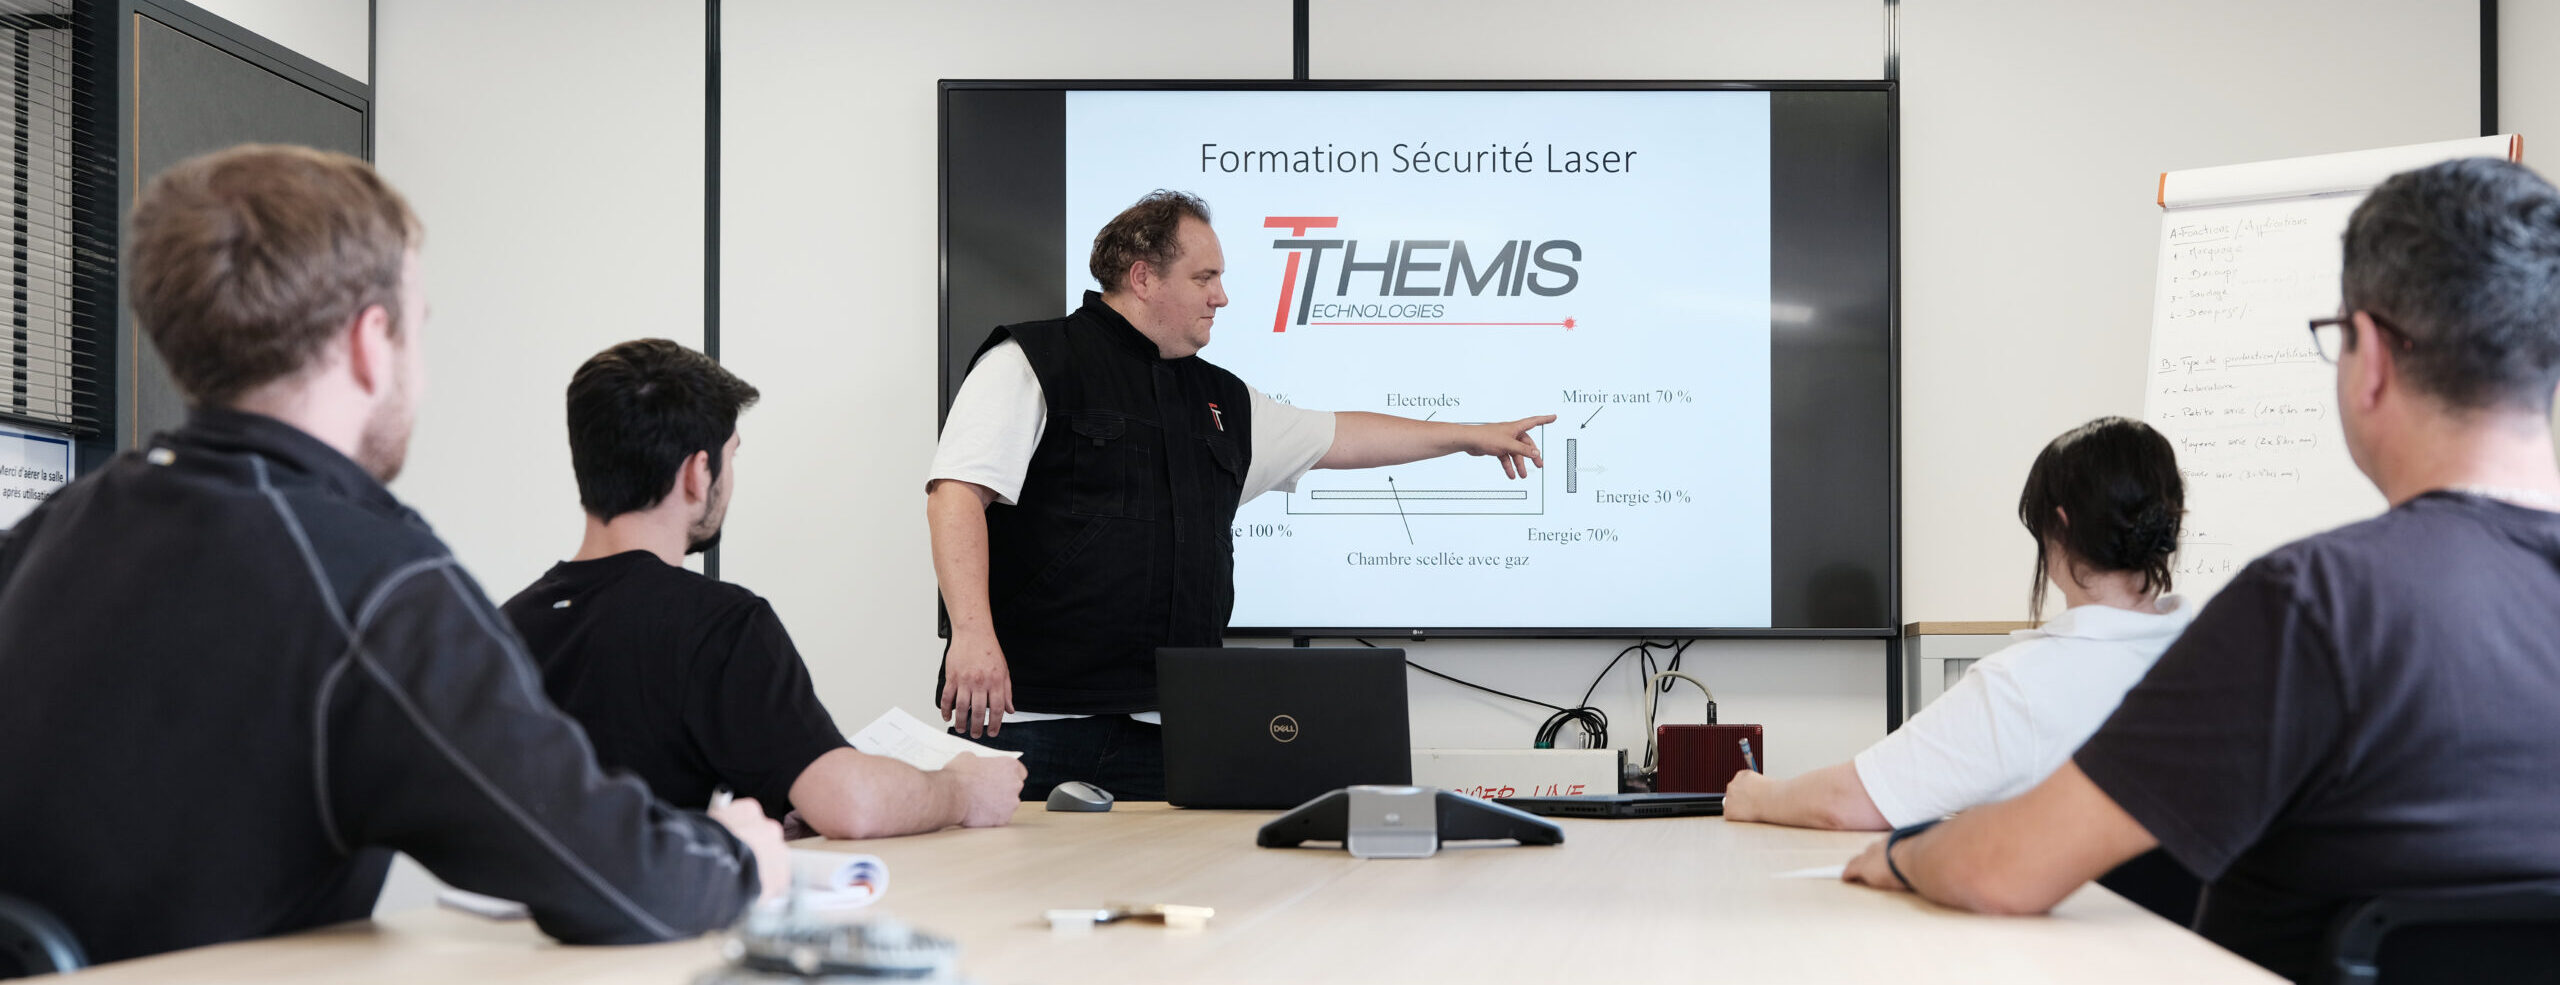 formation laser themis technologies